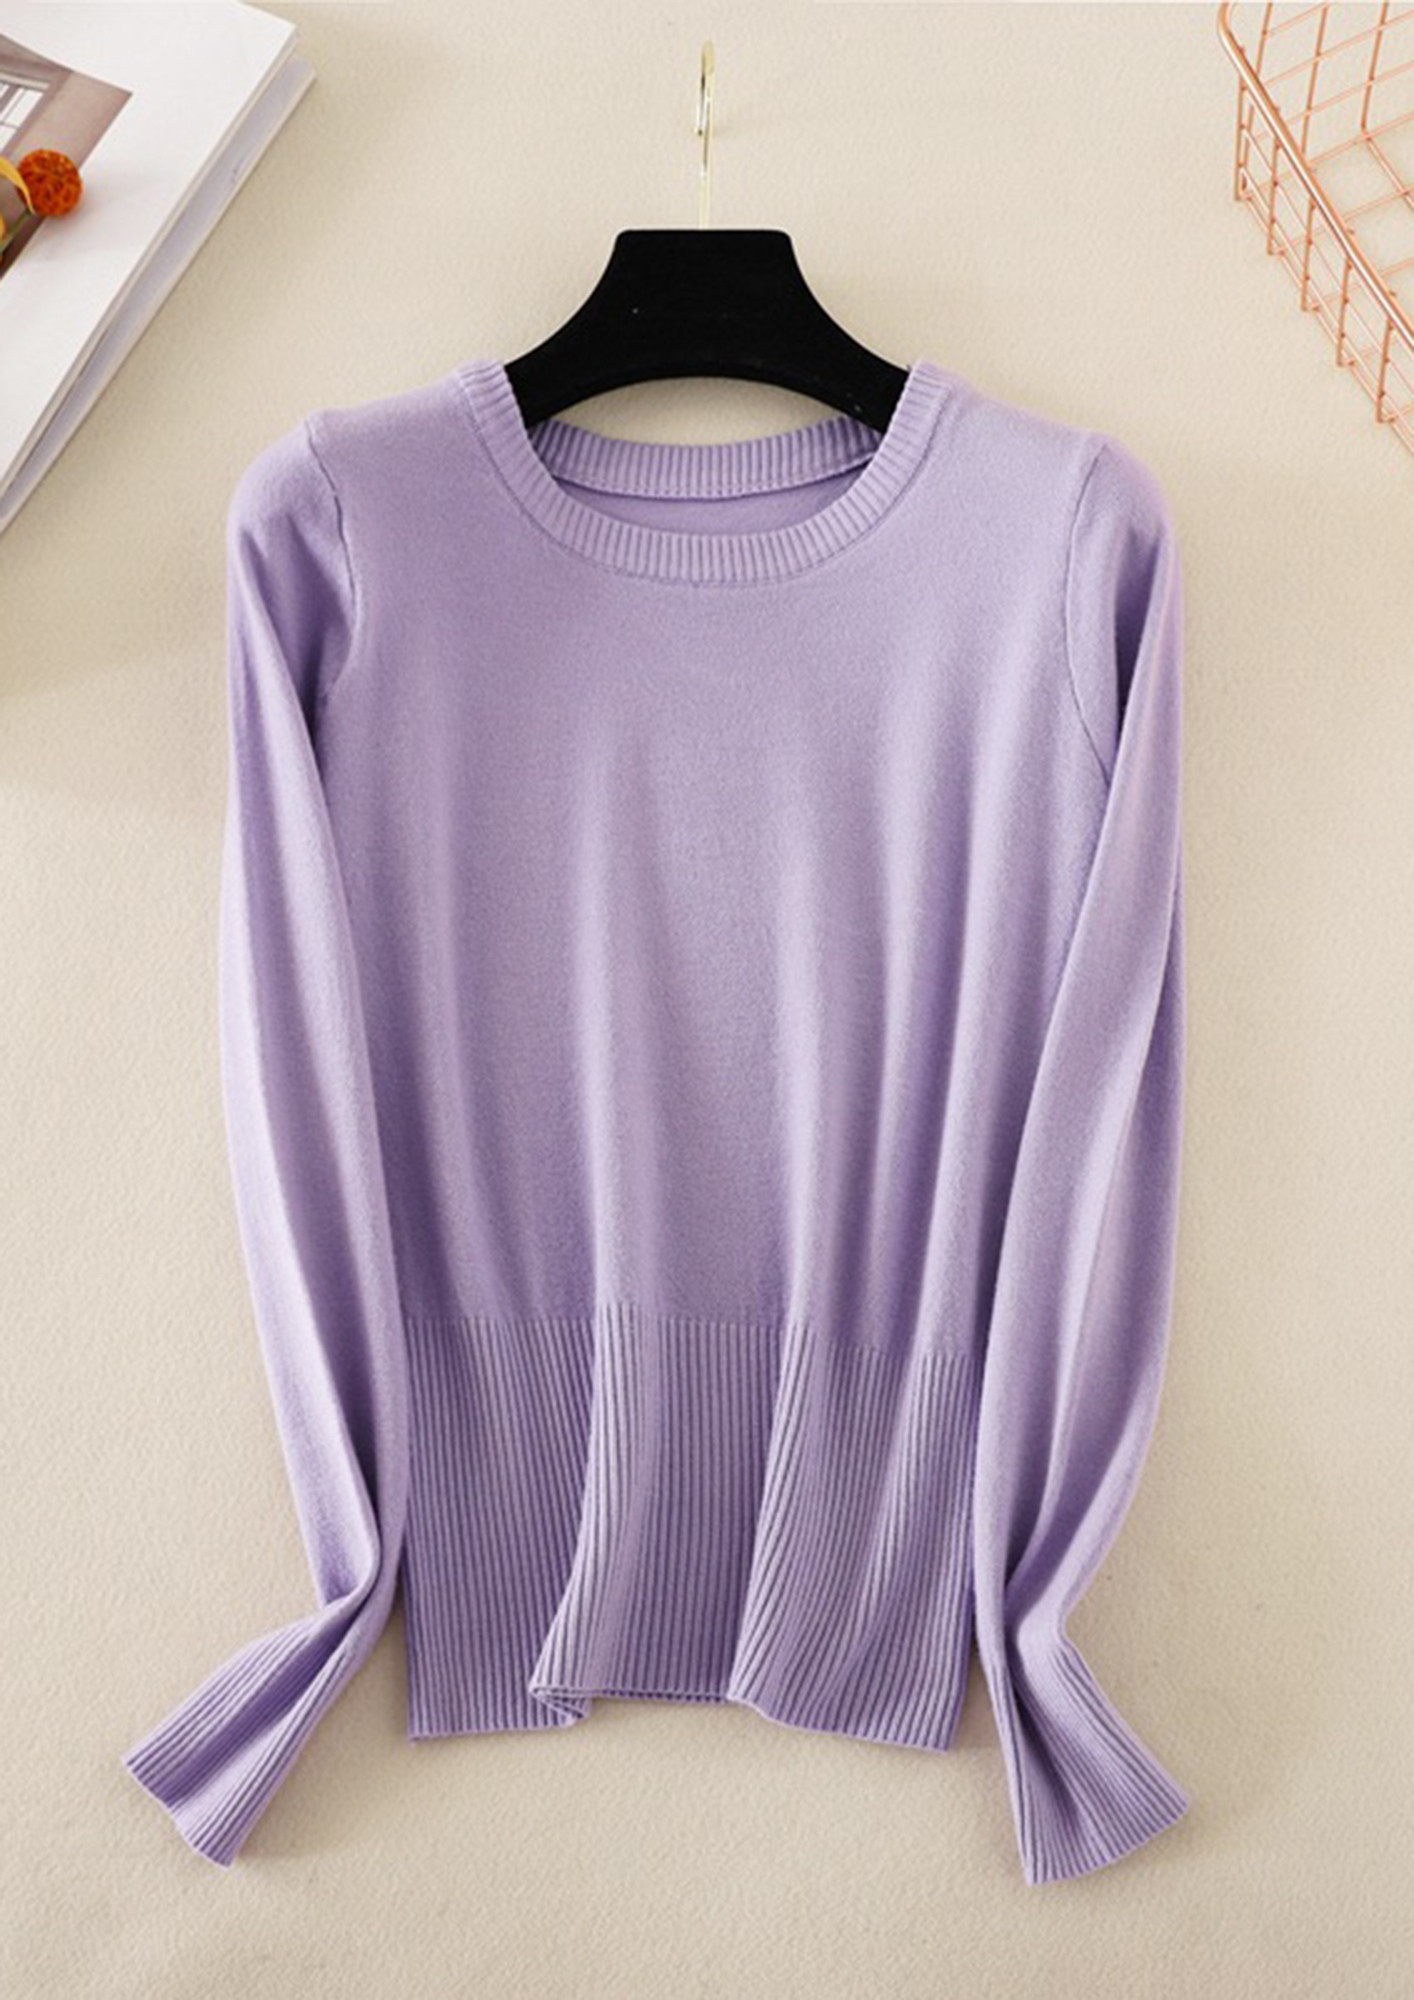 IN ROUND NECK PURPLE KNIT SOLID T-SHIRT